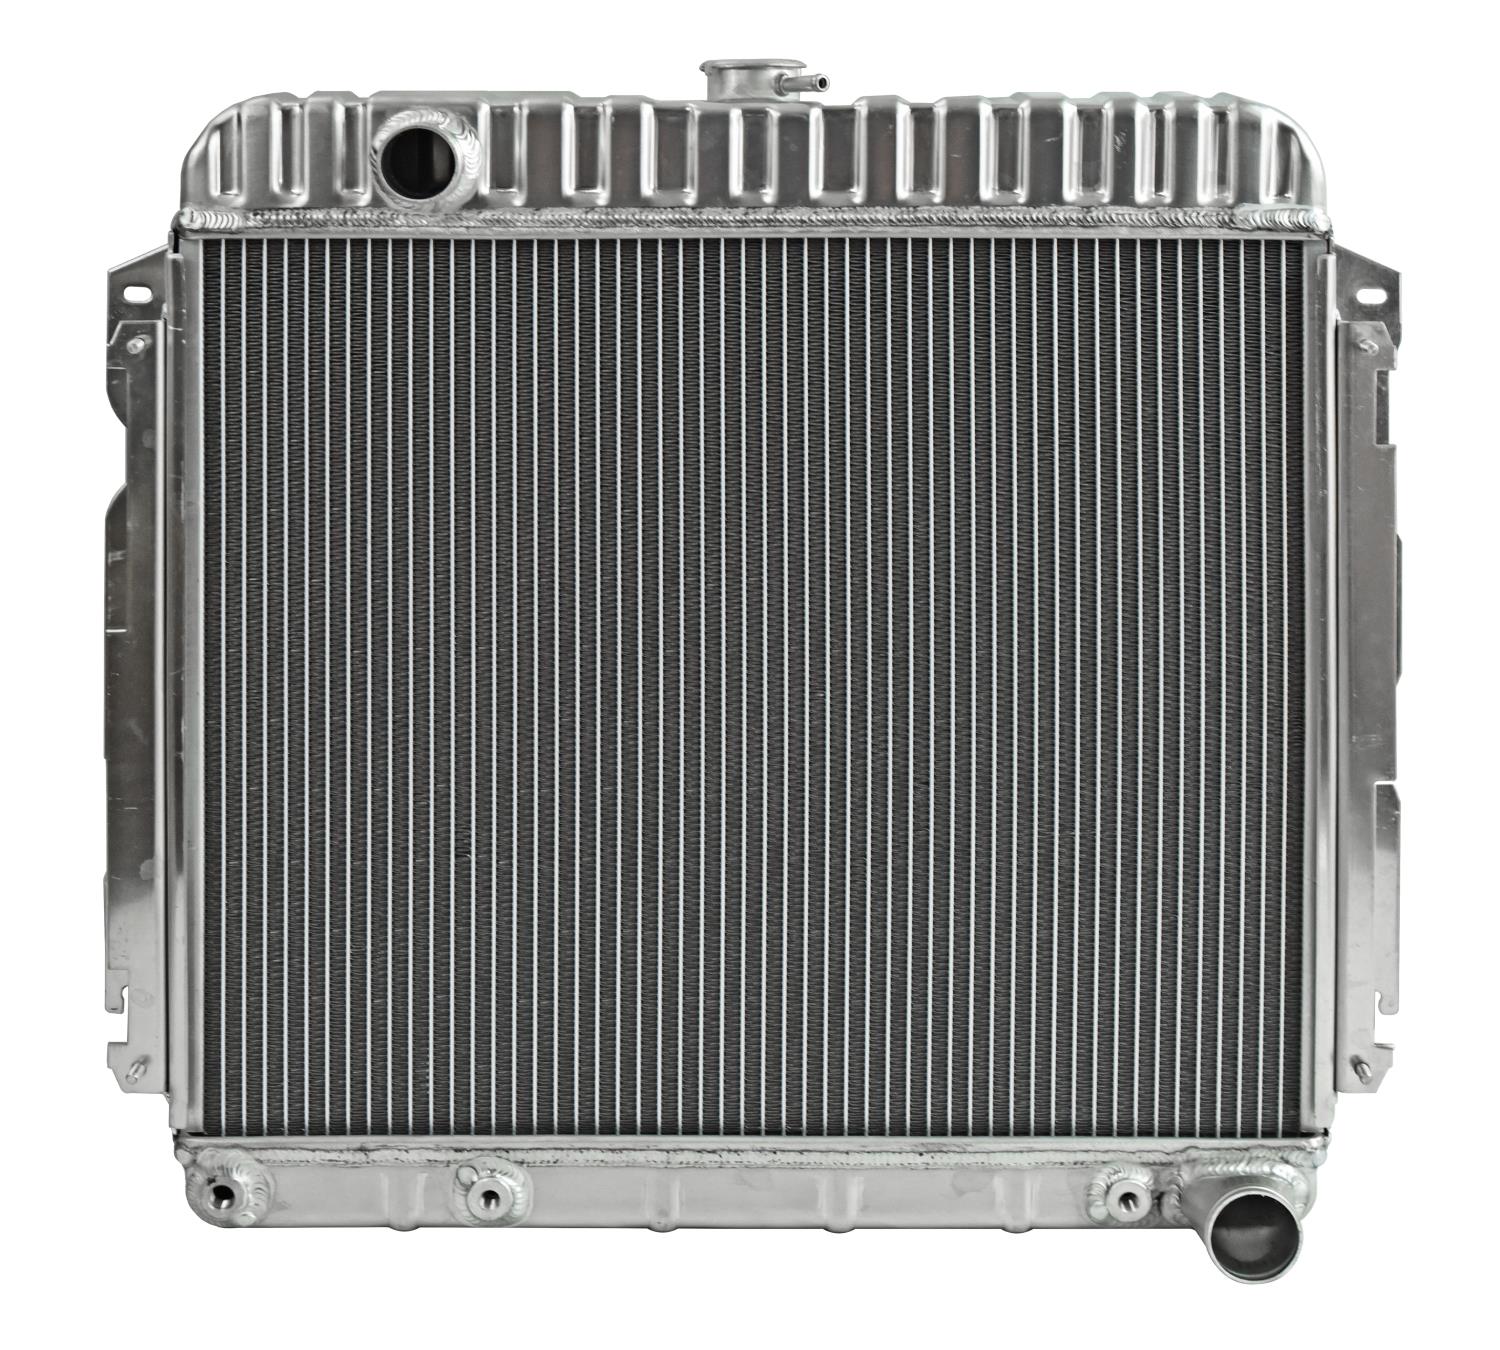 Reproduction Aluminum Radiator for Select 1970-1972 Mopar B & E Bodies With Small Block